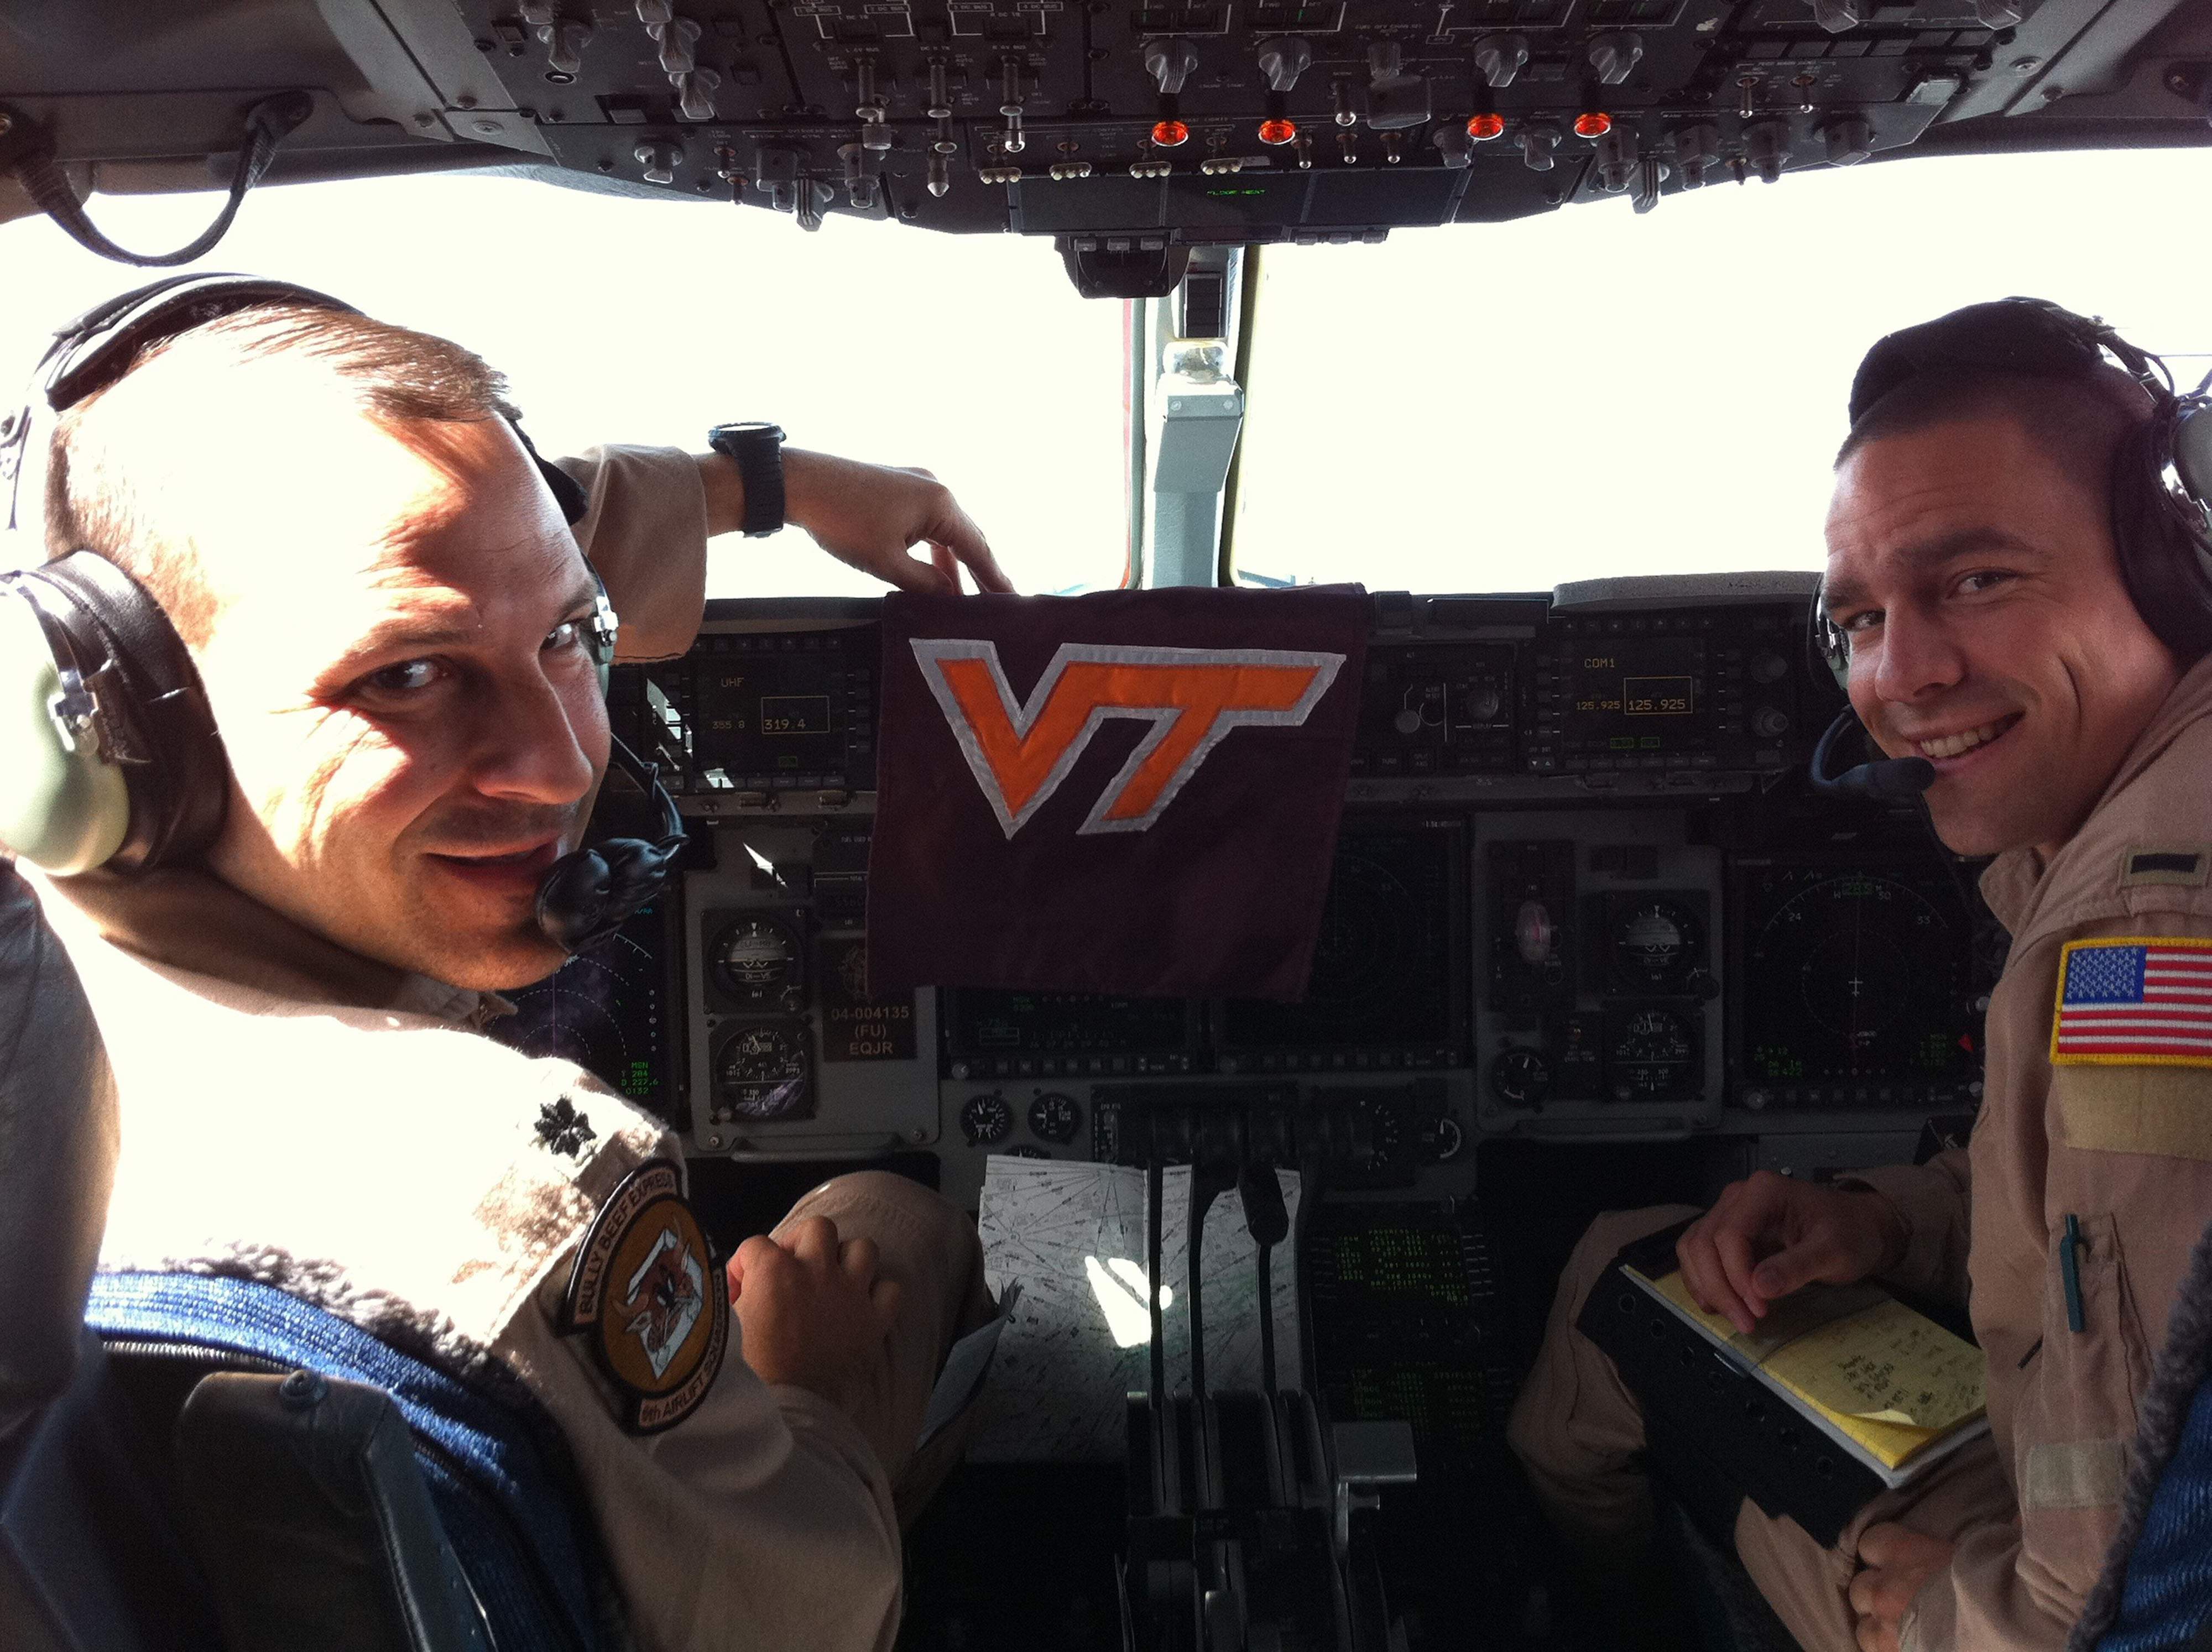 Lt. Col. Doug Hall (left), U.S. Air Force, Virginia Tech Corps of Cadets Class of 1992 and 1st. Lt. Purvis "PC" Gaddis (right), U.S. Air Force, Virginia Tech Corps of Cadets Class of 2009 shown in early September returning from Europe, flying the C-17A Globemaster III that they will bring to Virginia Tech for the Arkansas State game